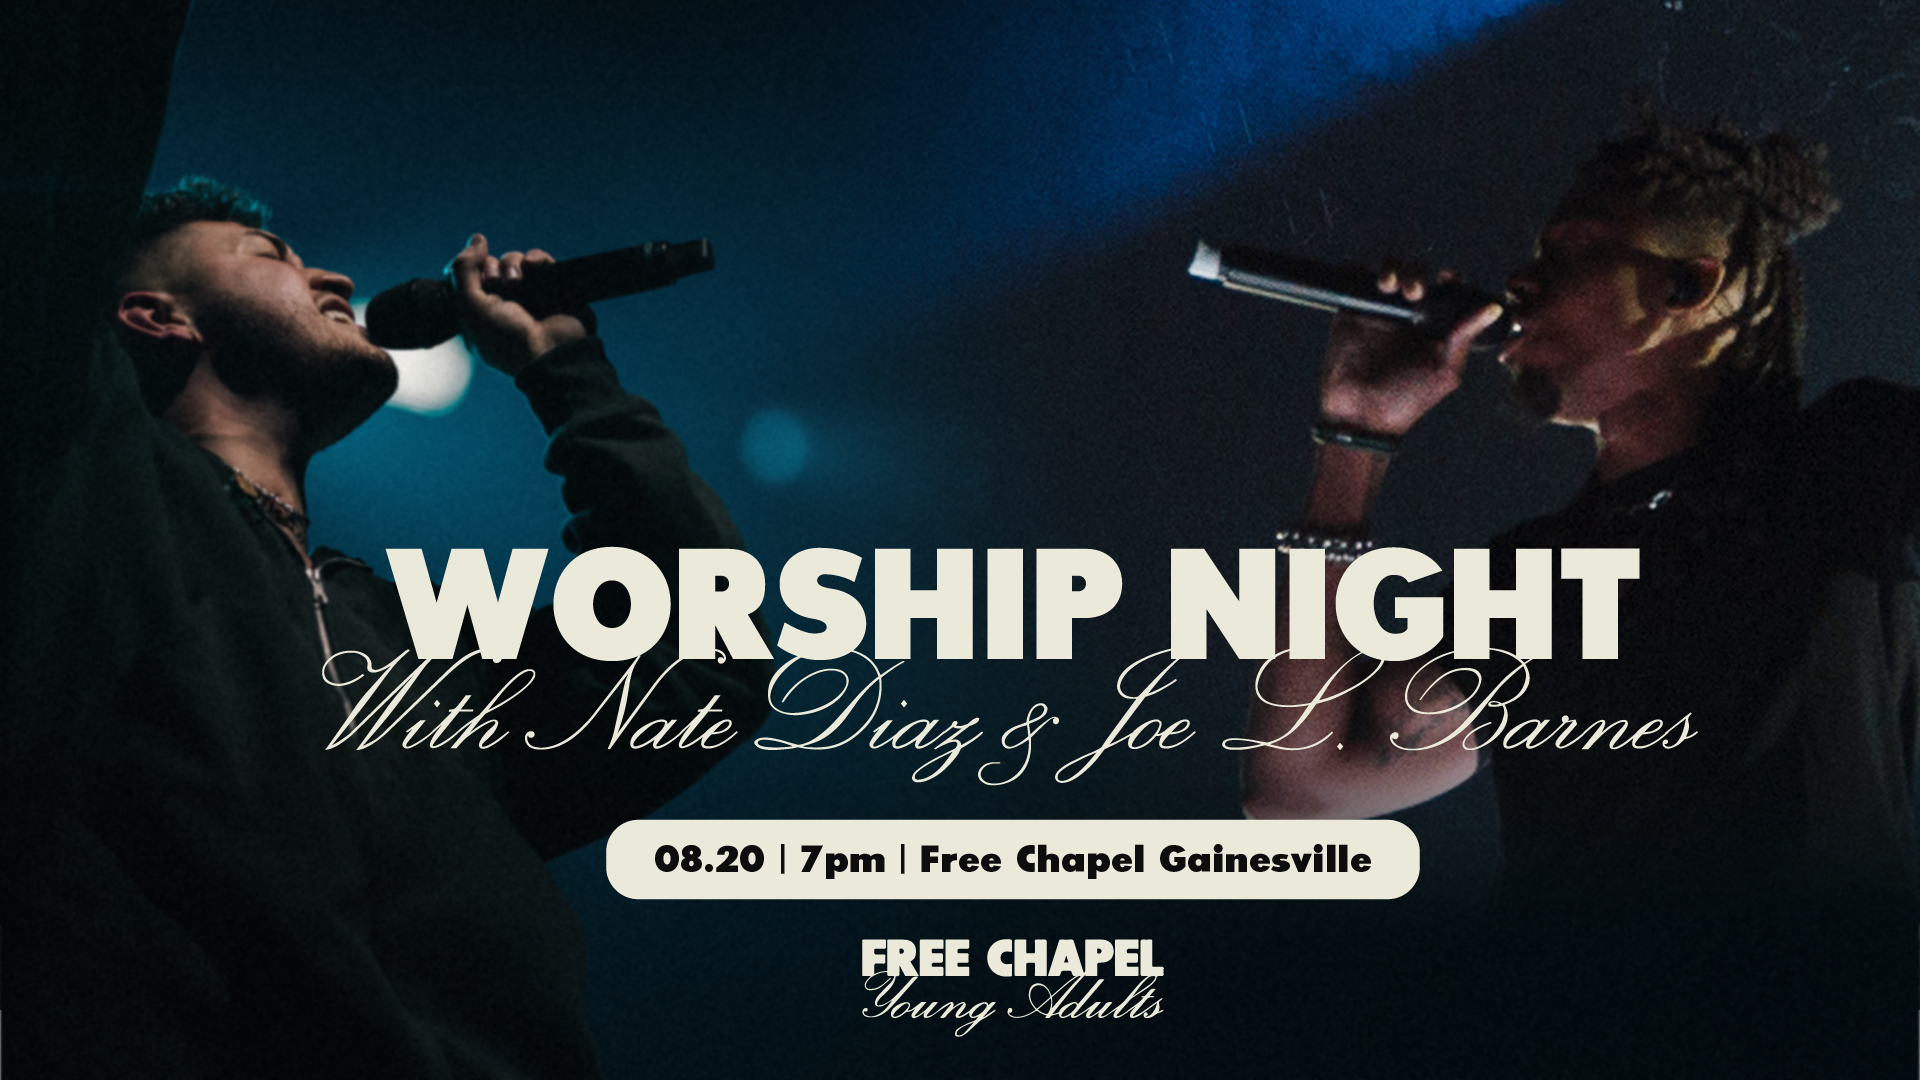 Young Adults United Worship Night with Nate Diaz & Joe L. Barnes at the Alpharetta campus